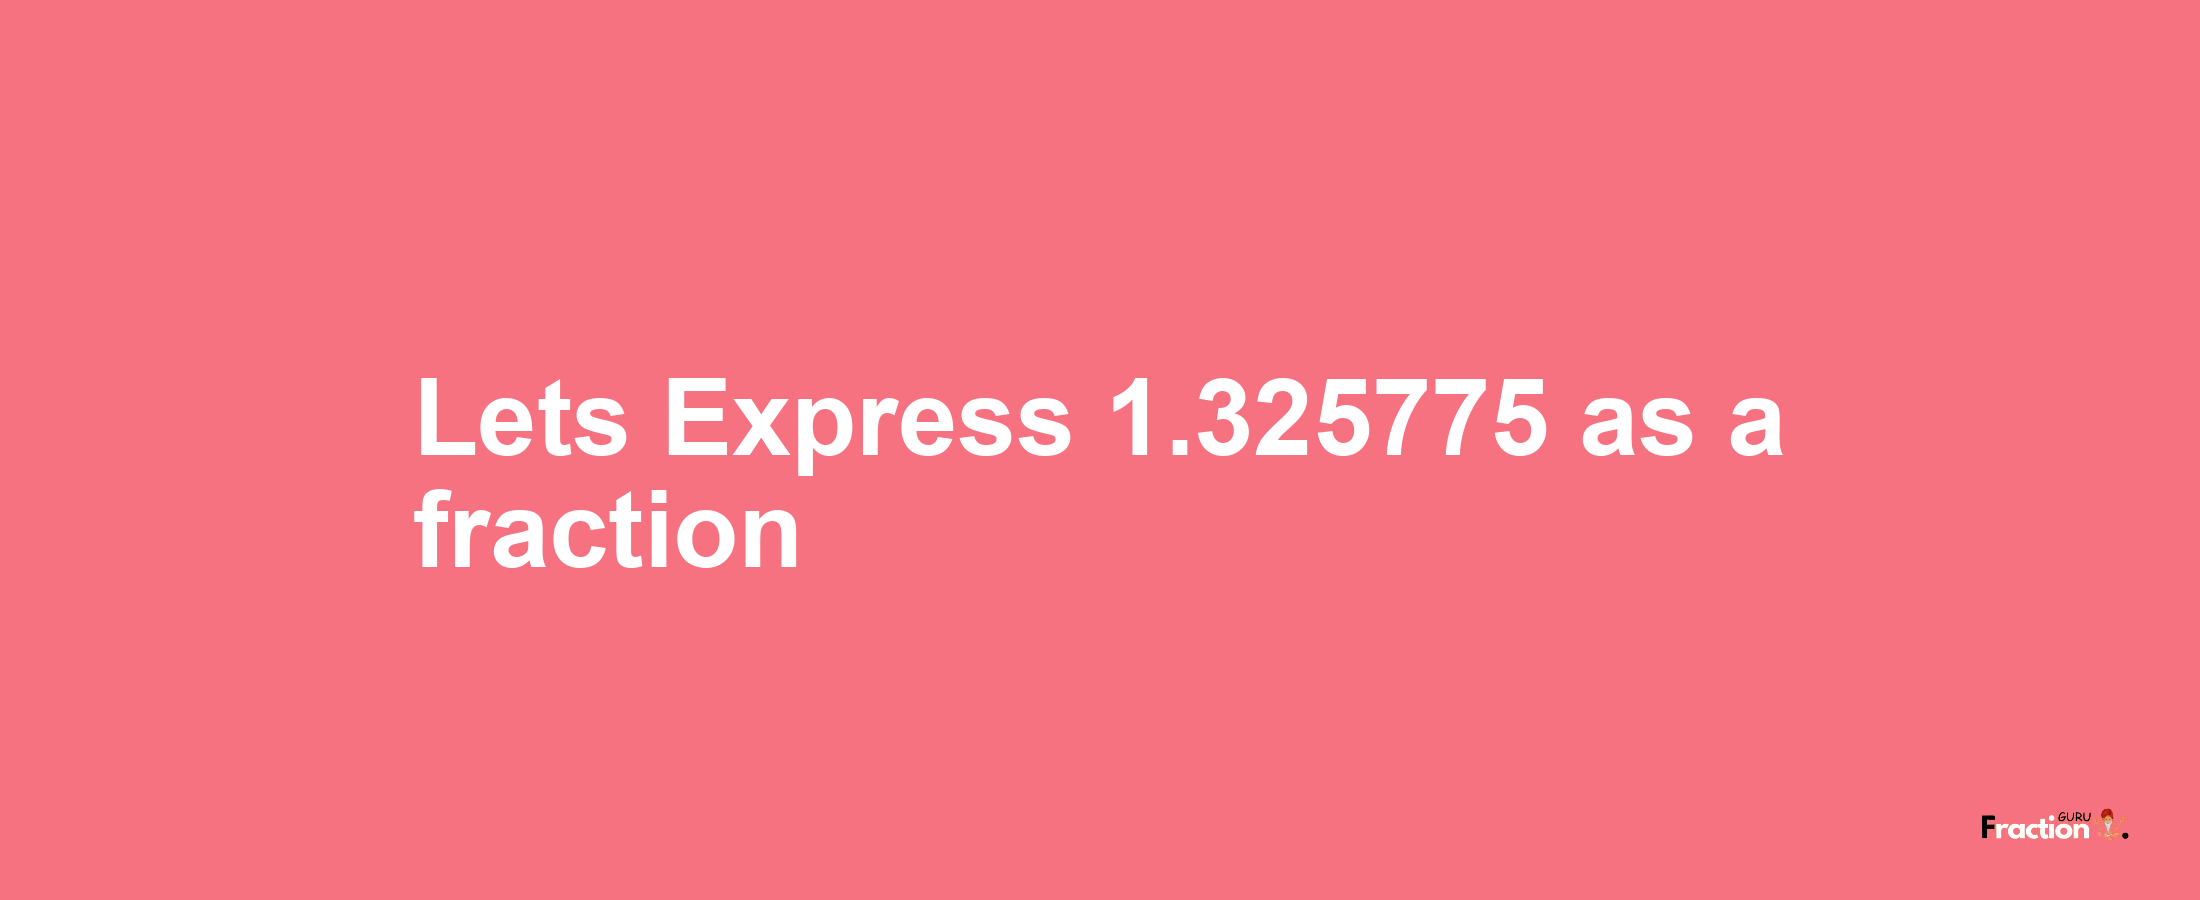 Lets Express 1.325775 as afraction